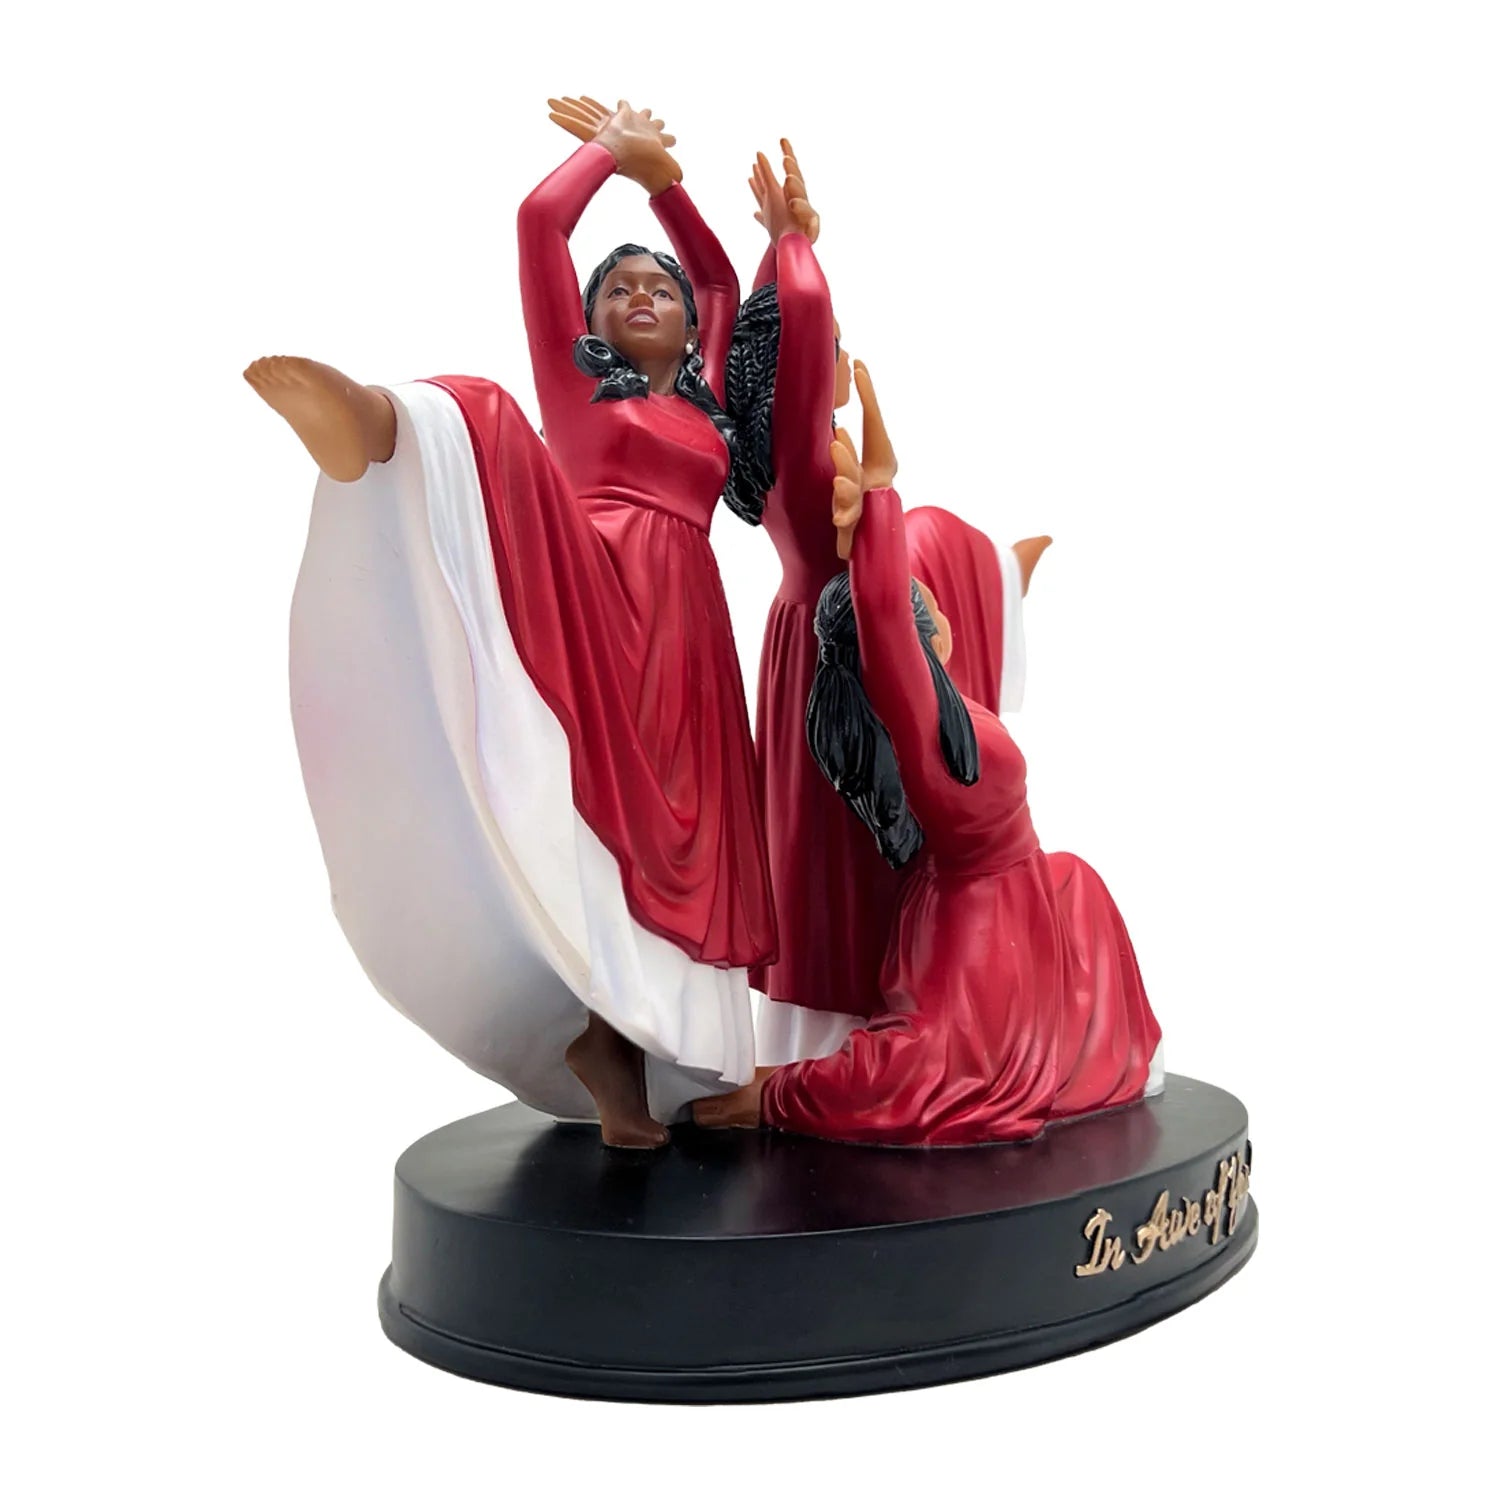 3 of 25: In Awe of You: African American Praise Dancer Figurine (Diva Edition)